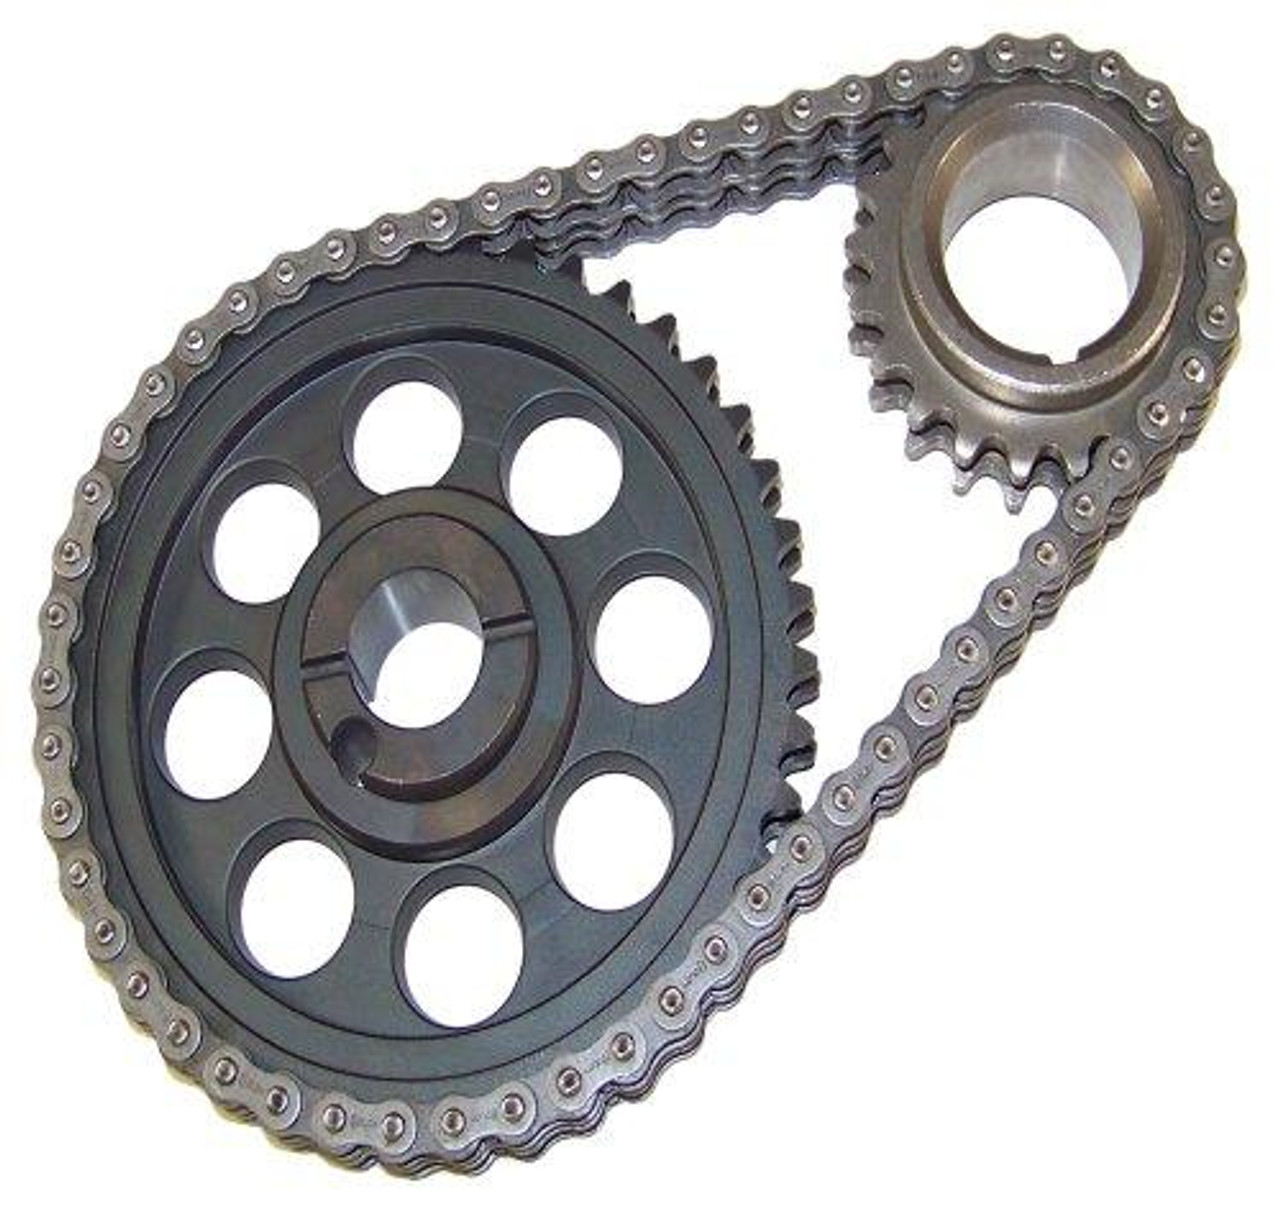 Timing Chain Kit - 1990 Ford Mustang 5.0L Engine Parts # TK4113ZE83